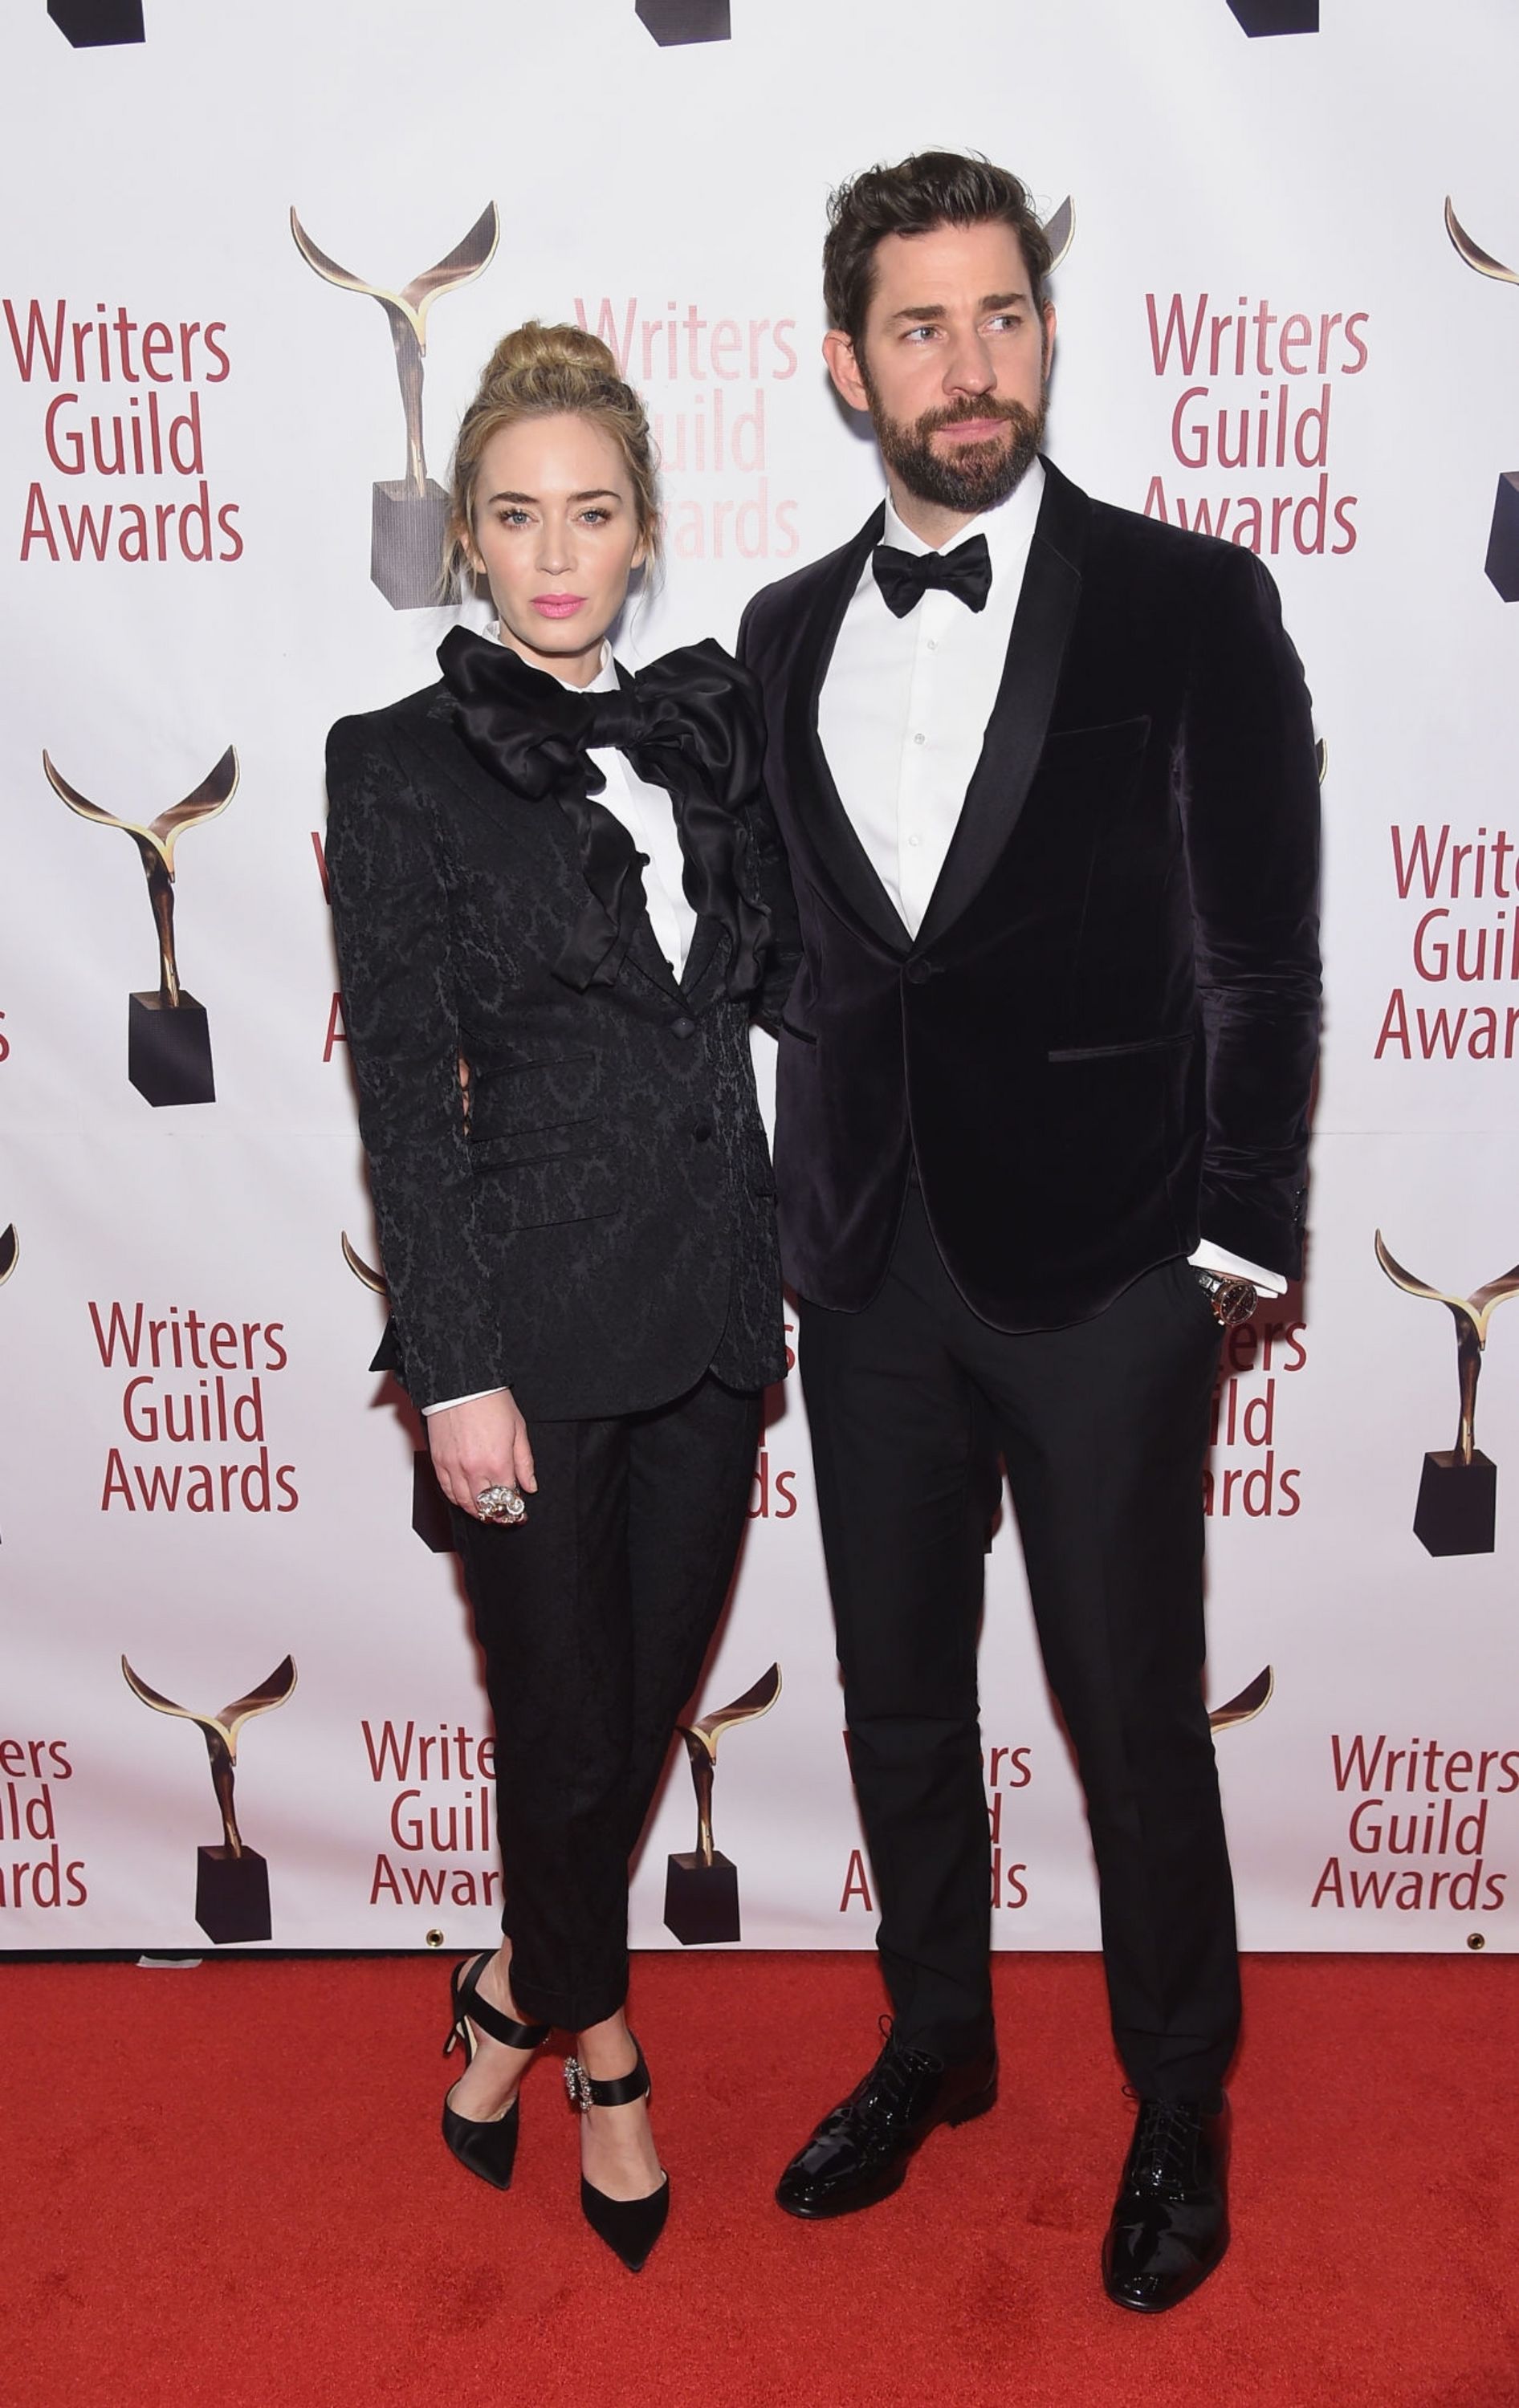 2019-02-17-71st-Annual-Writers-Guild-Awards-015.jpg